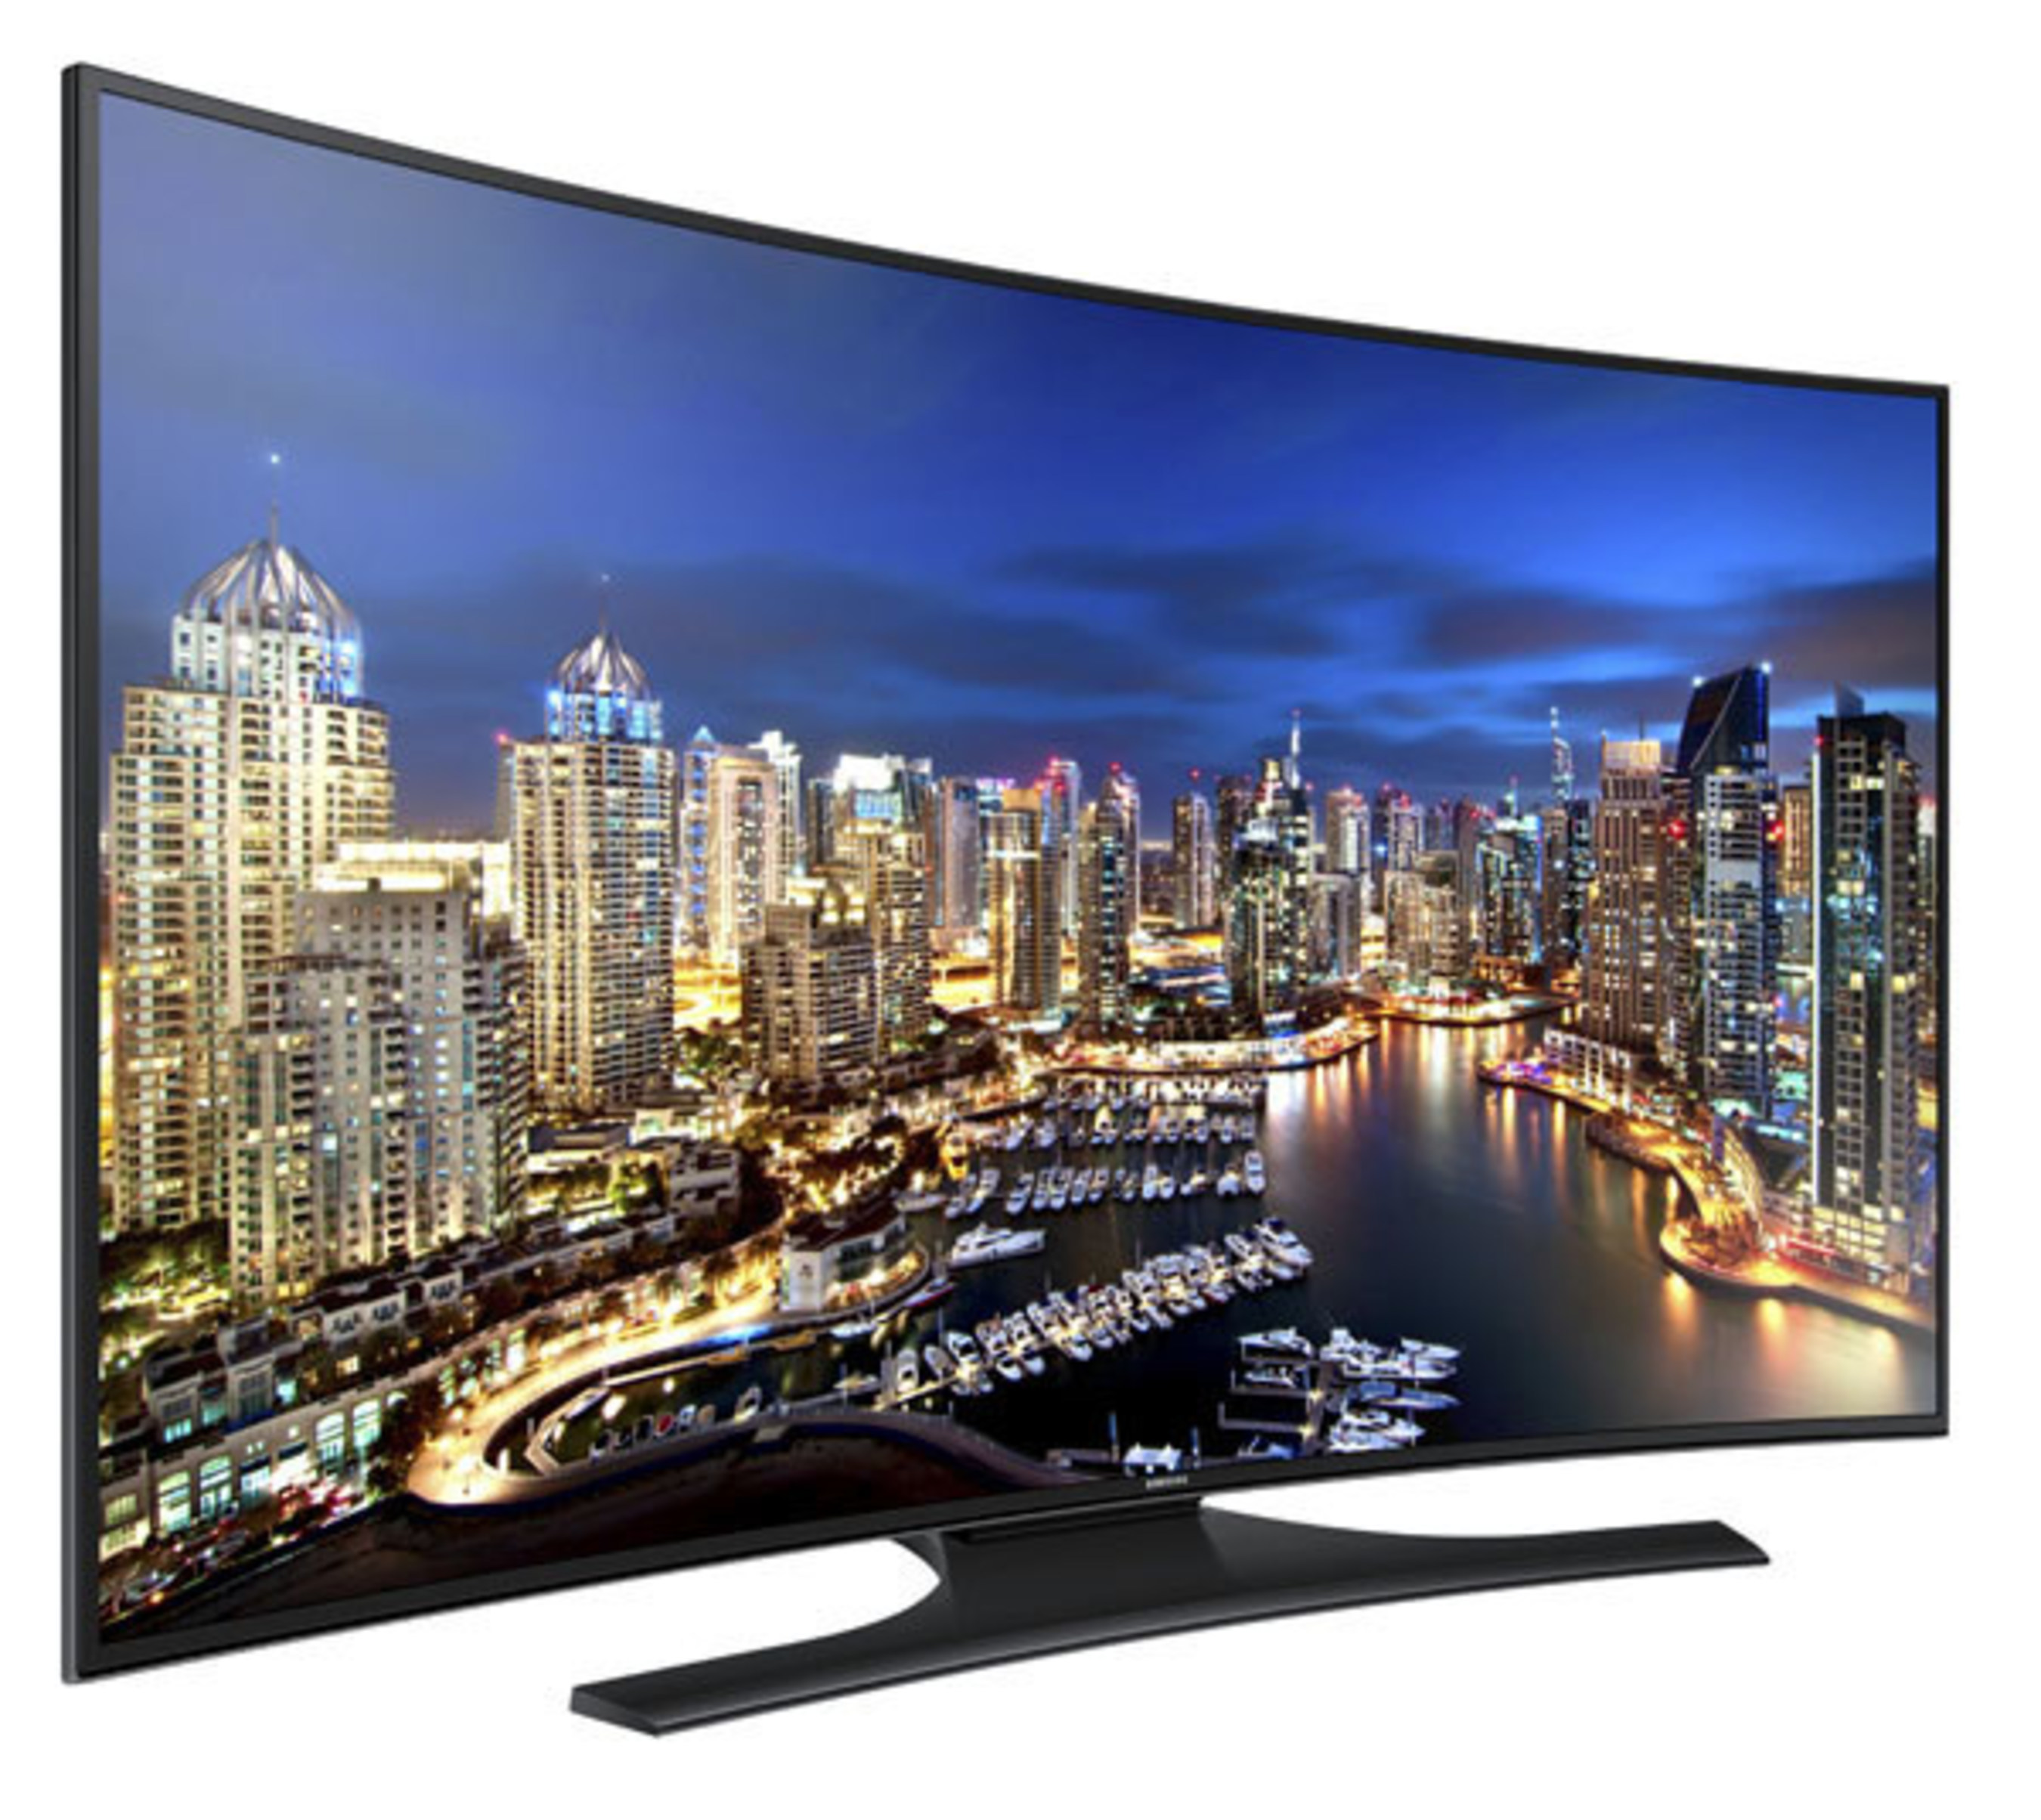 Samsung 65 inch Curve UHD Smart LED TV at BJ's Wholesale Club